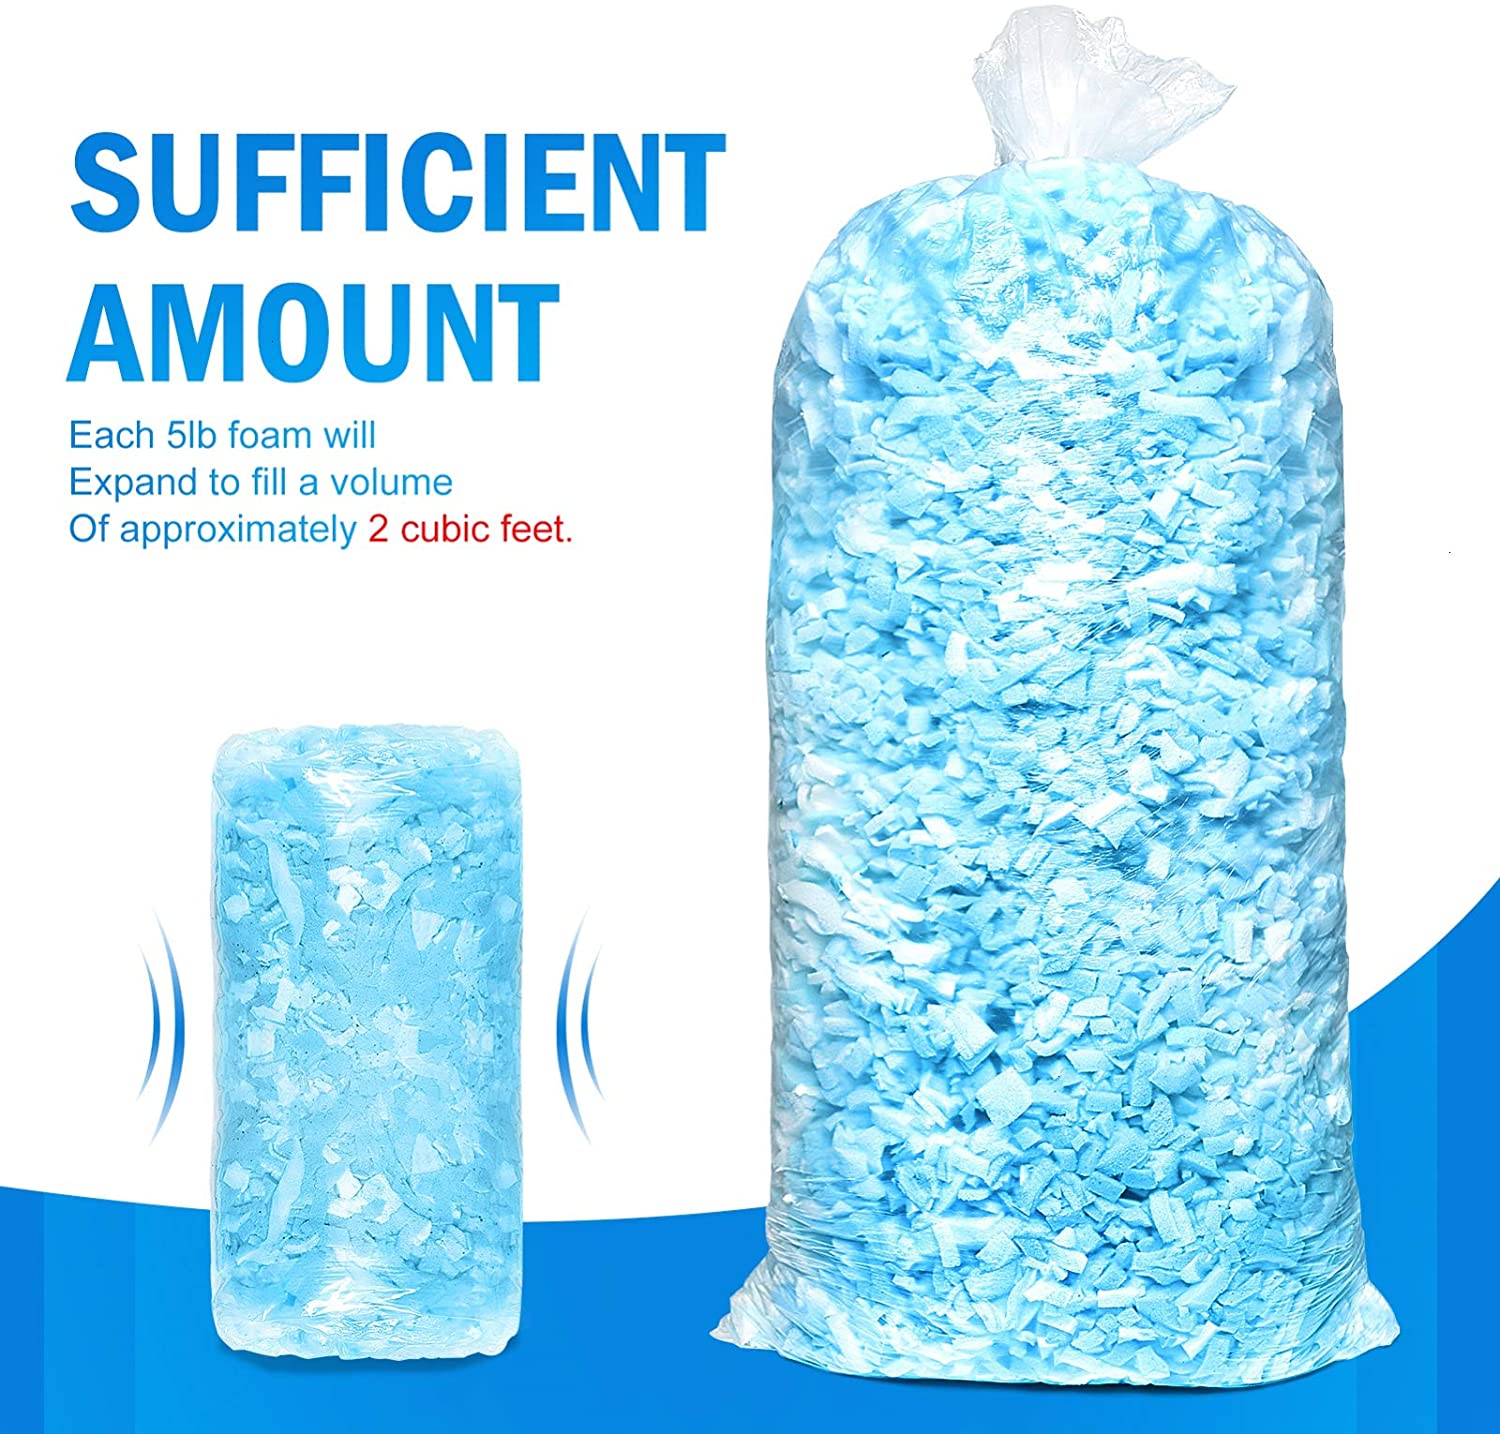  Welacer Shredded Memory Foam Filling 5lbs for Bean Bag Filler,  Without Added Gel Particles, Premium Soft Refill and Great for Stuffing,  Multi Color and Shape : Home & Kitchen